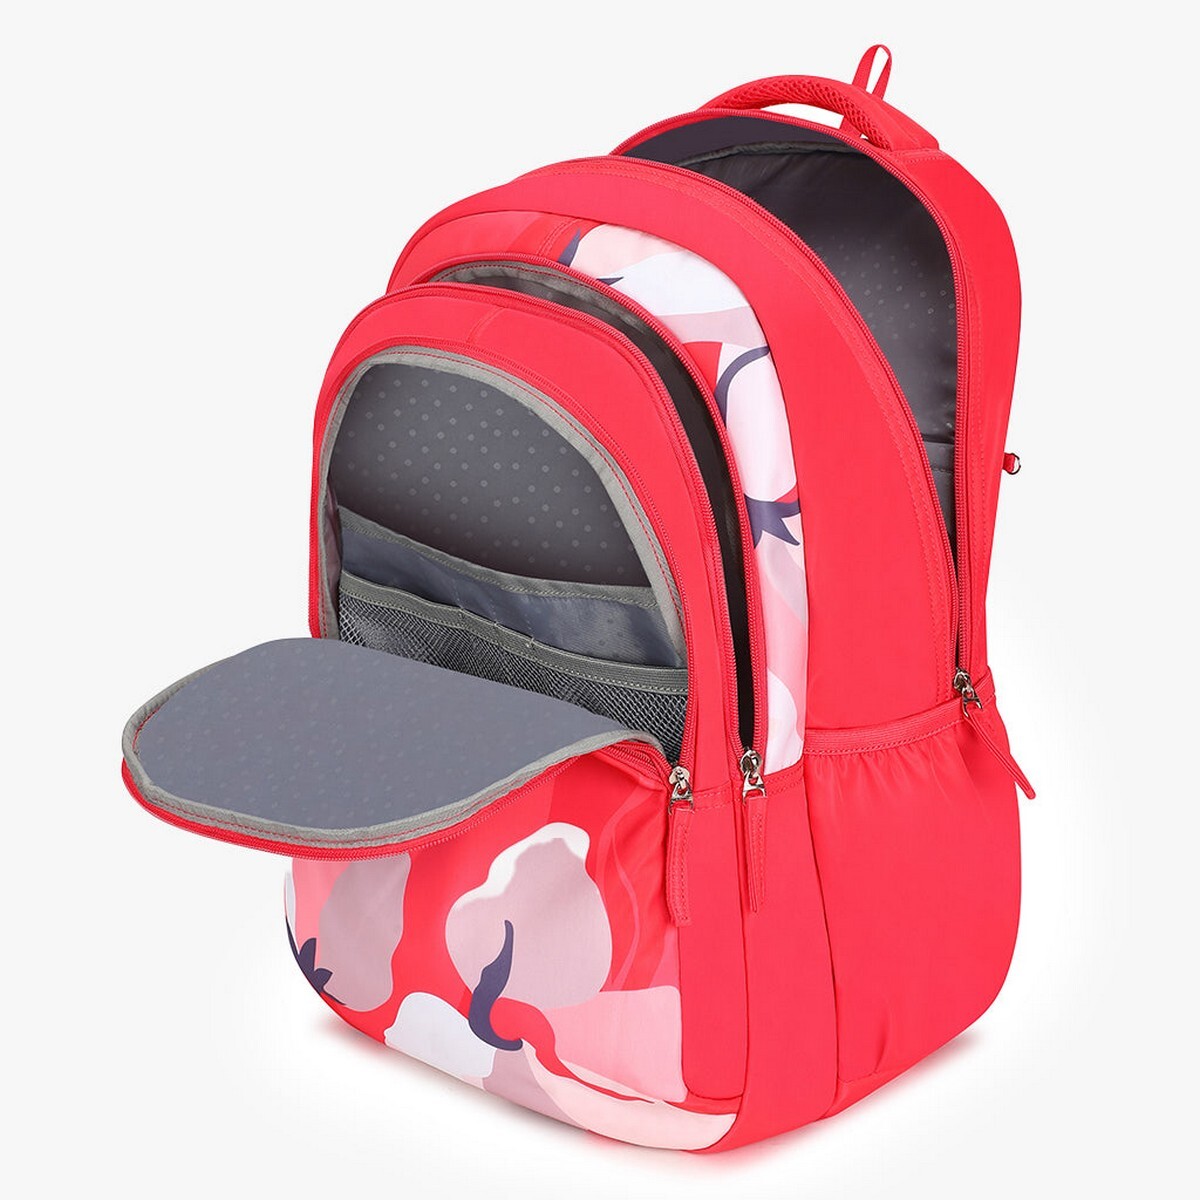 Genie Backpack Taylor 19inch Pink